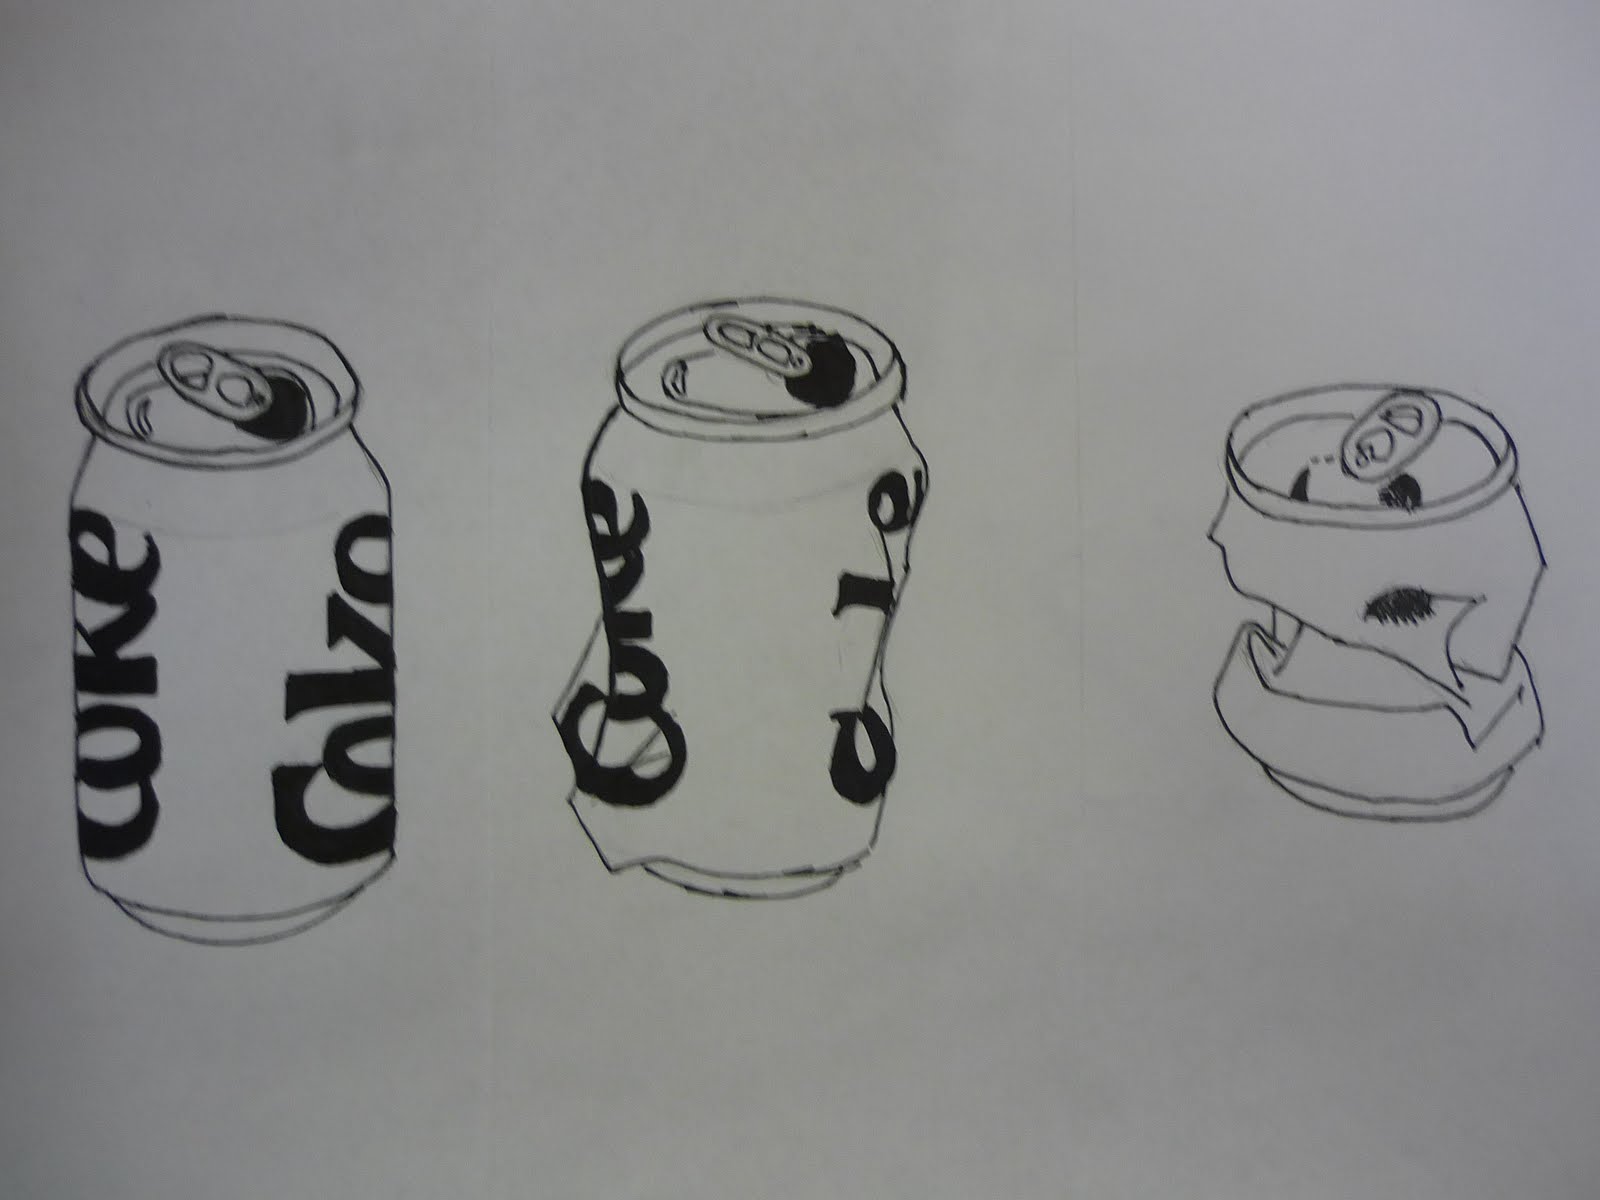 Today we tracing the line drawings of the crushed soda cans we drew. 